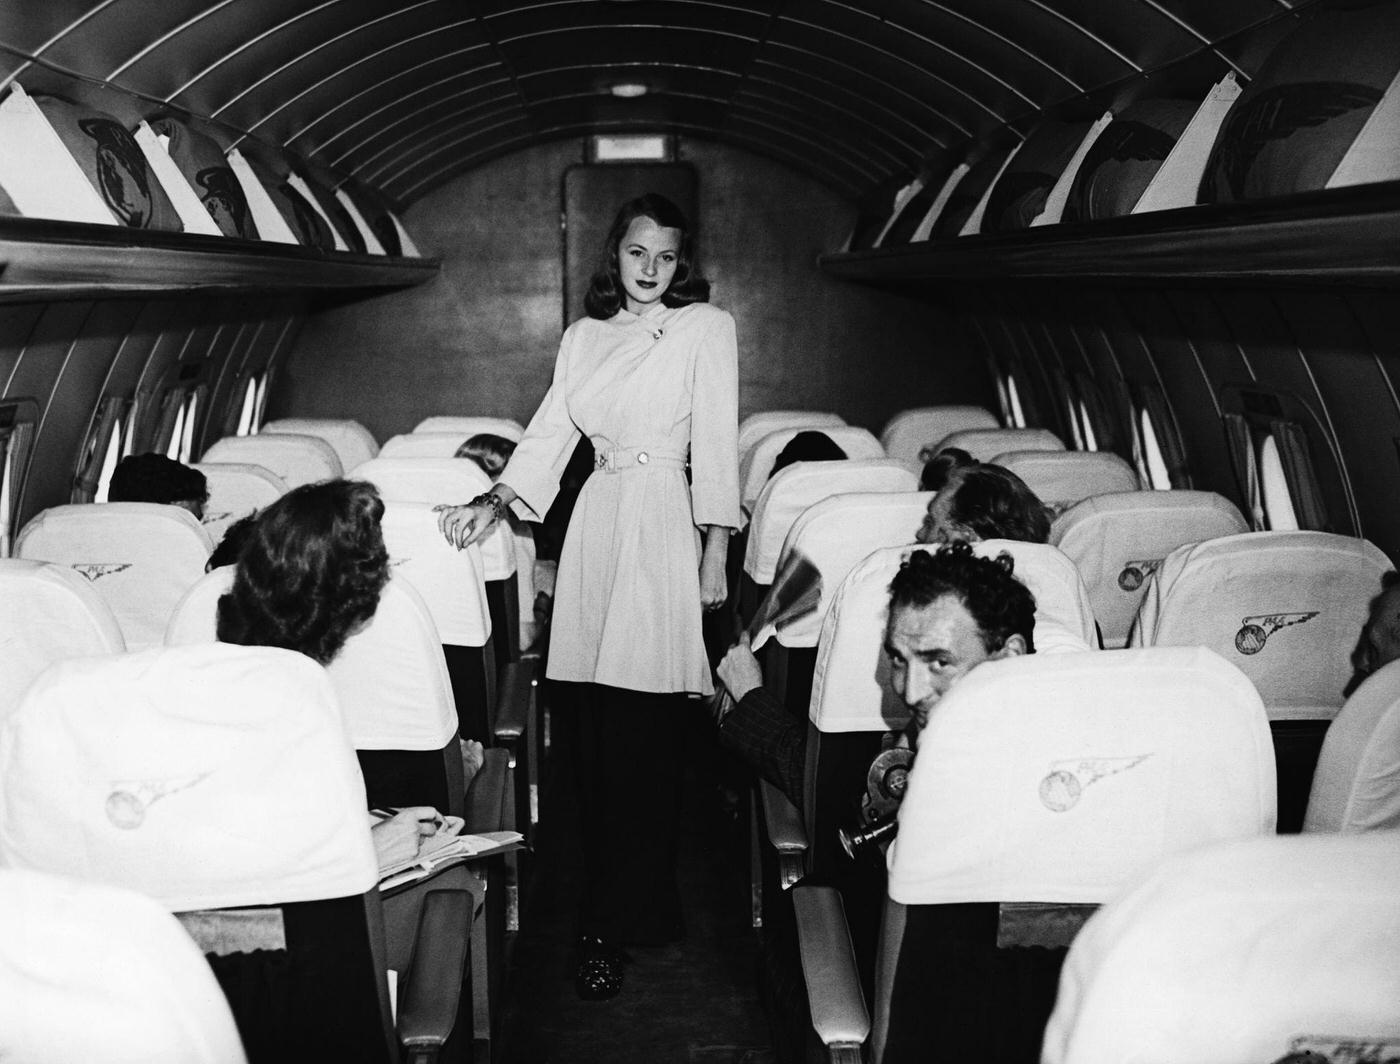 In July 1946, June Fogg models a black-and-white lounge suit during a fashion show staged on board a Pan American Airways Clipper aeroplane during its transatlantic flight from the USA.